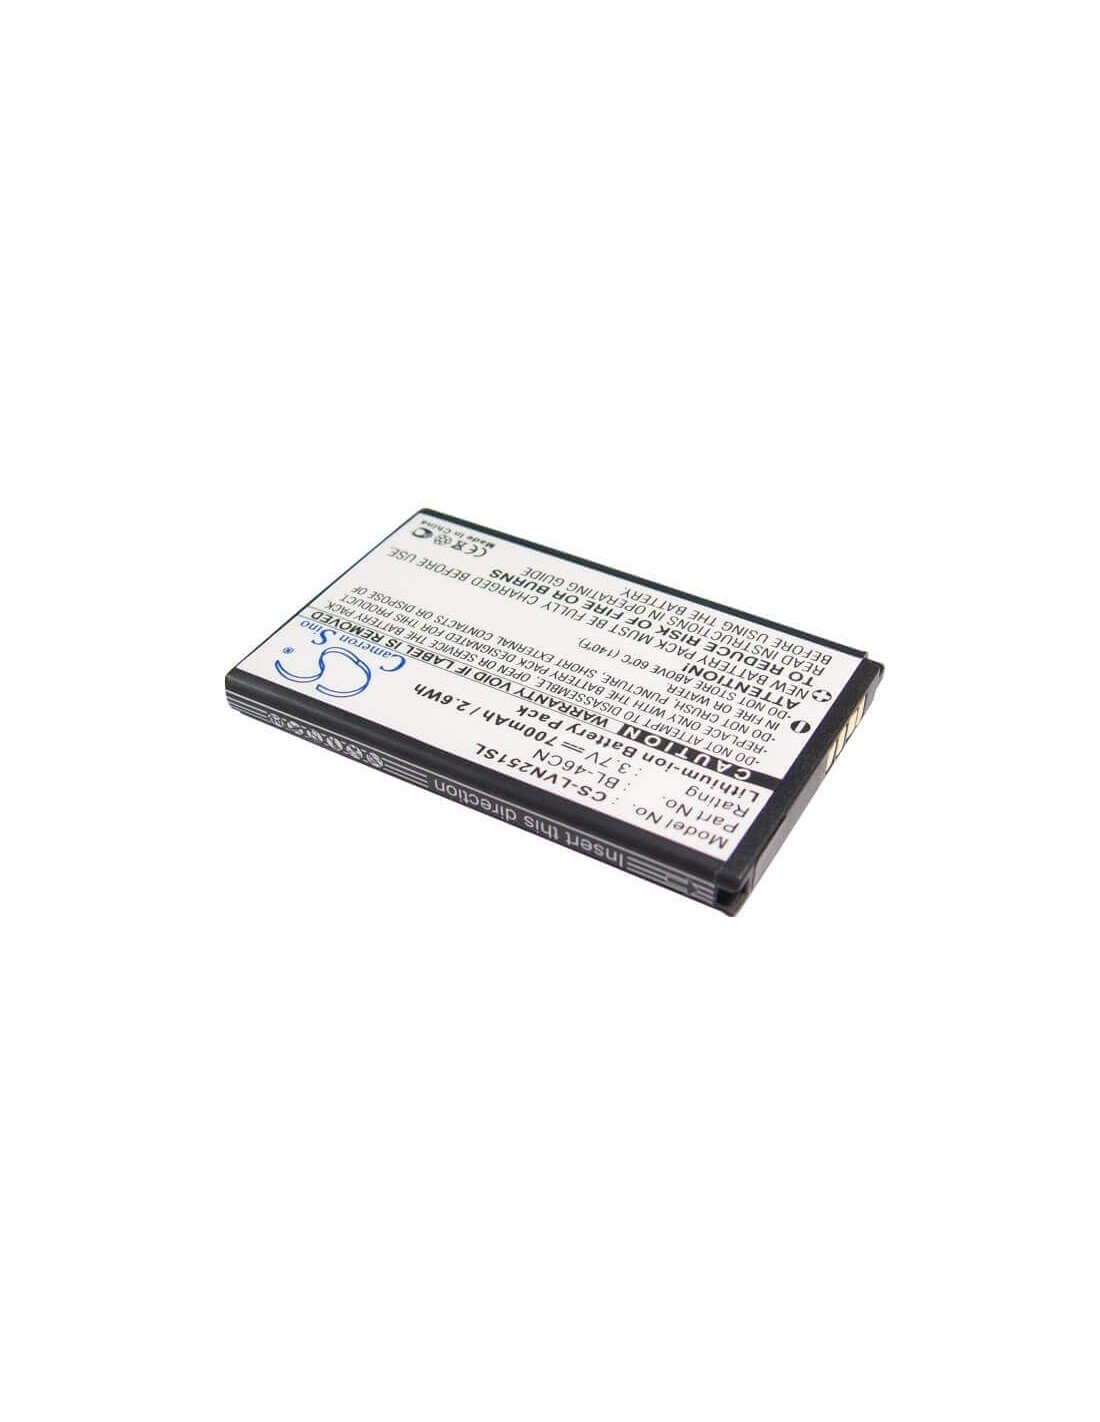 Battery for LG Cosmos 2, VN251, A340 3.7V, 700mAh - 2.59Wh